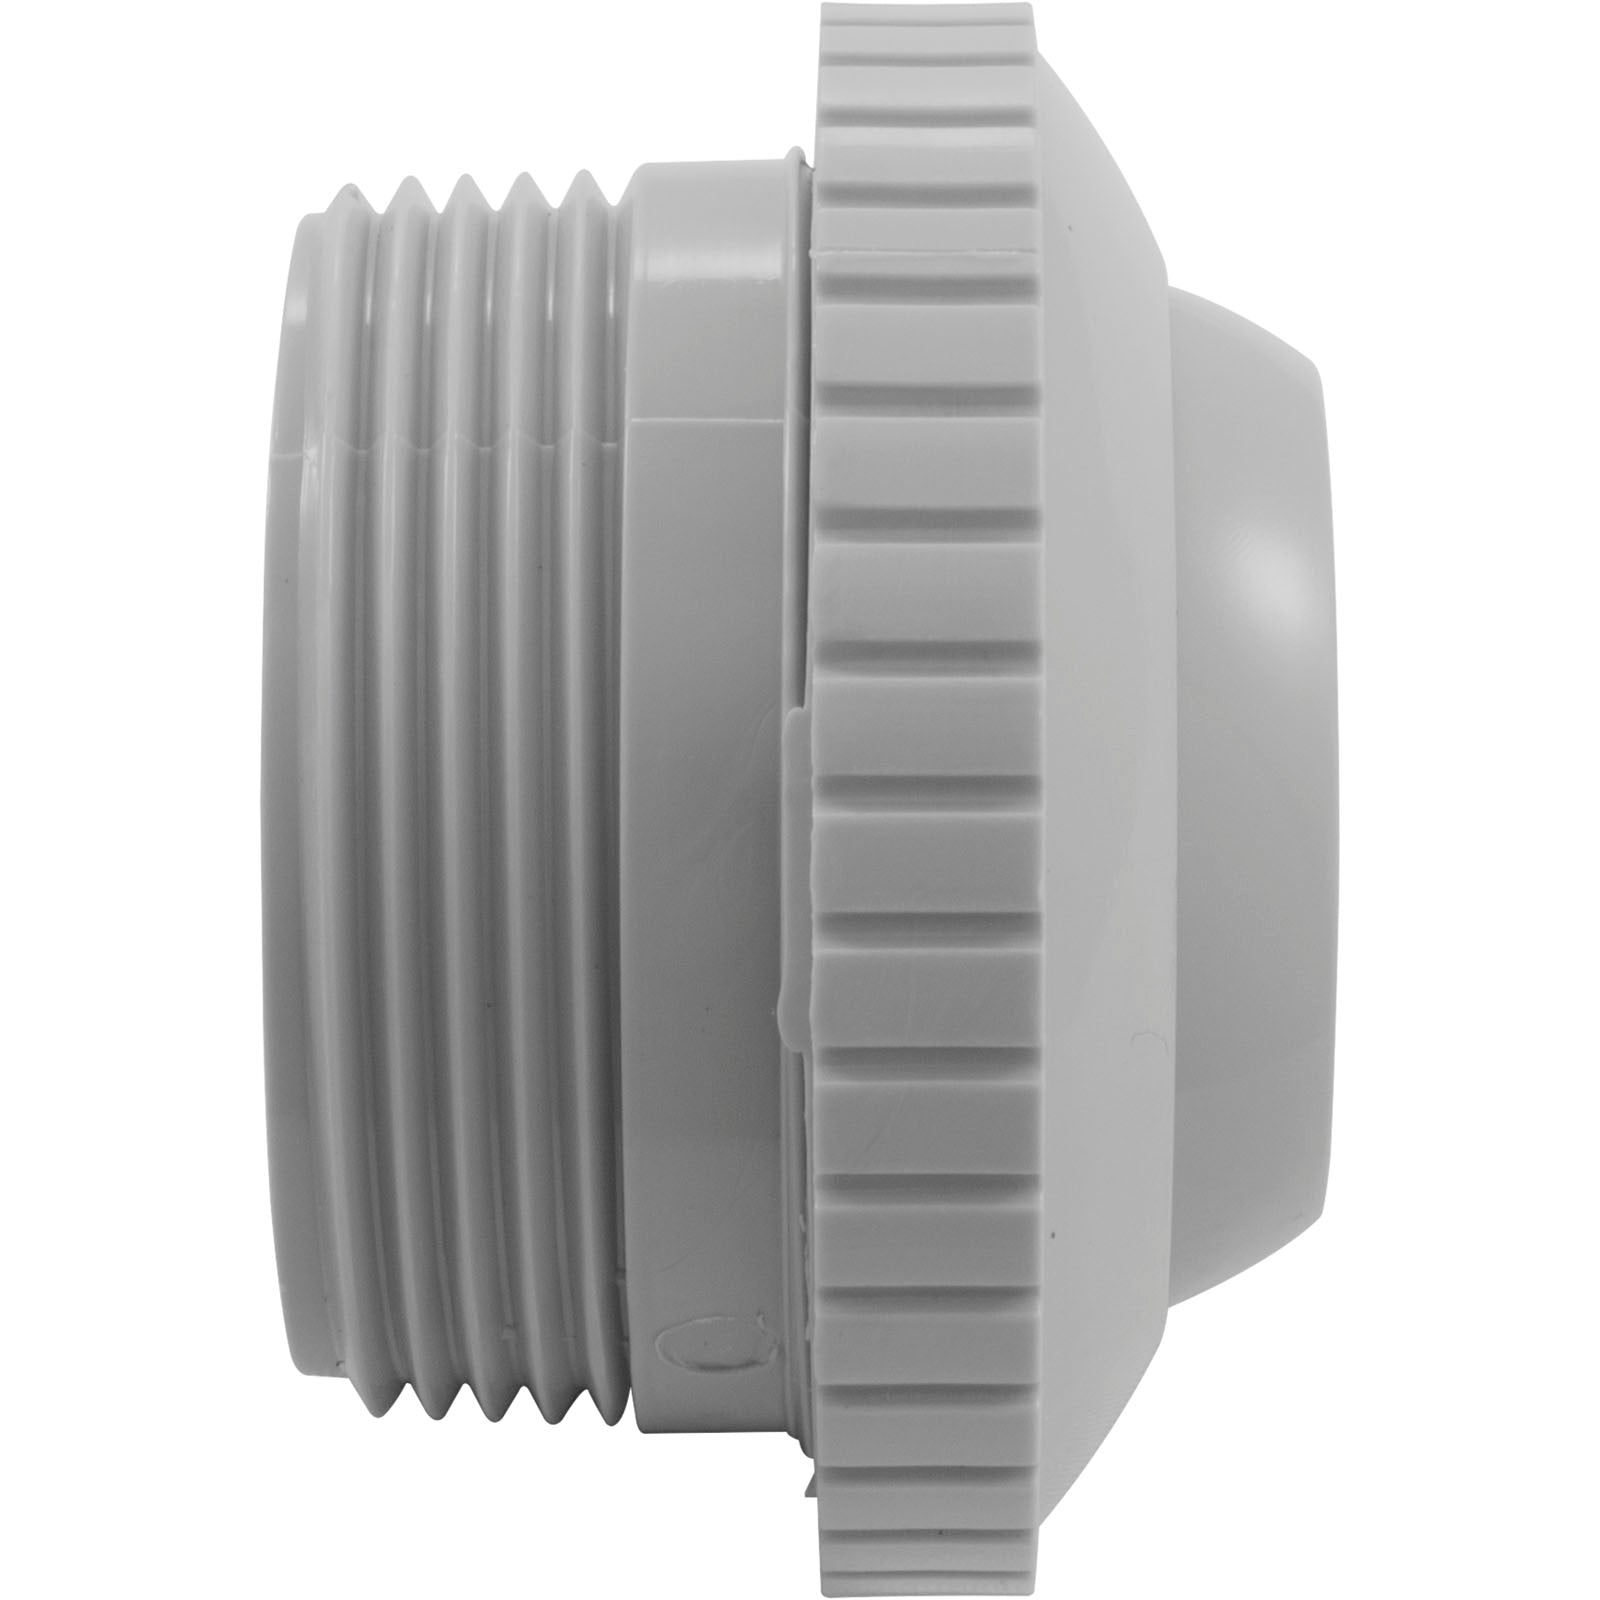 Directional Flow Inlet Ftg, Hayward Hydrosweep, 1/2", Gry SP1419CGR